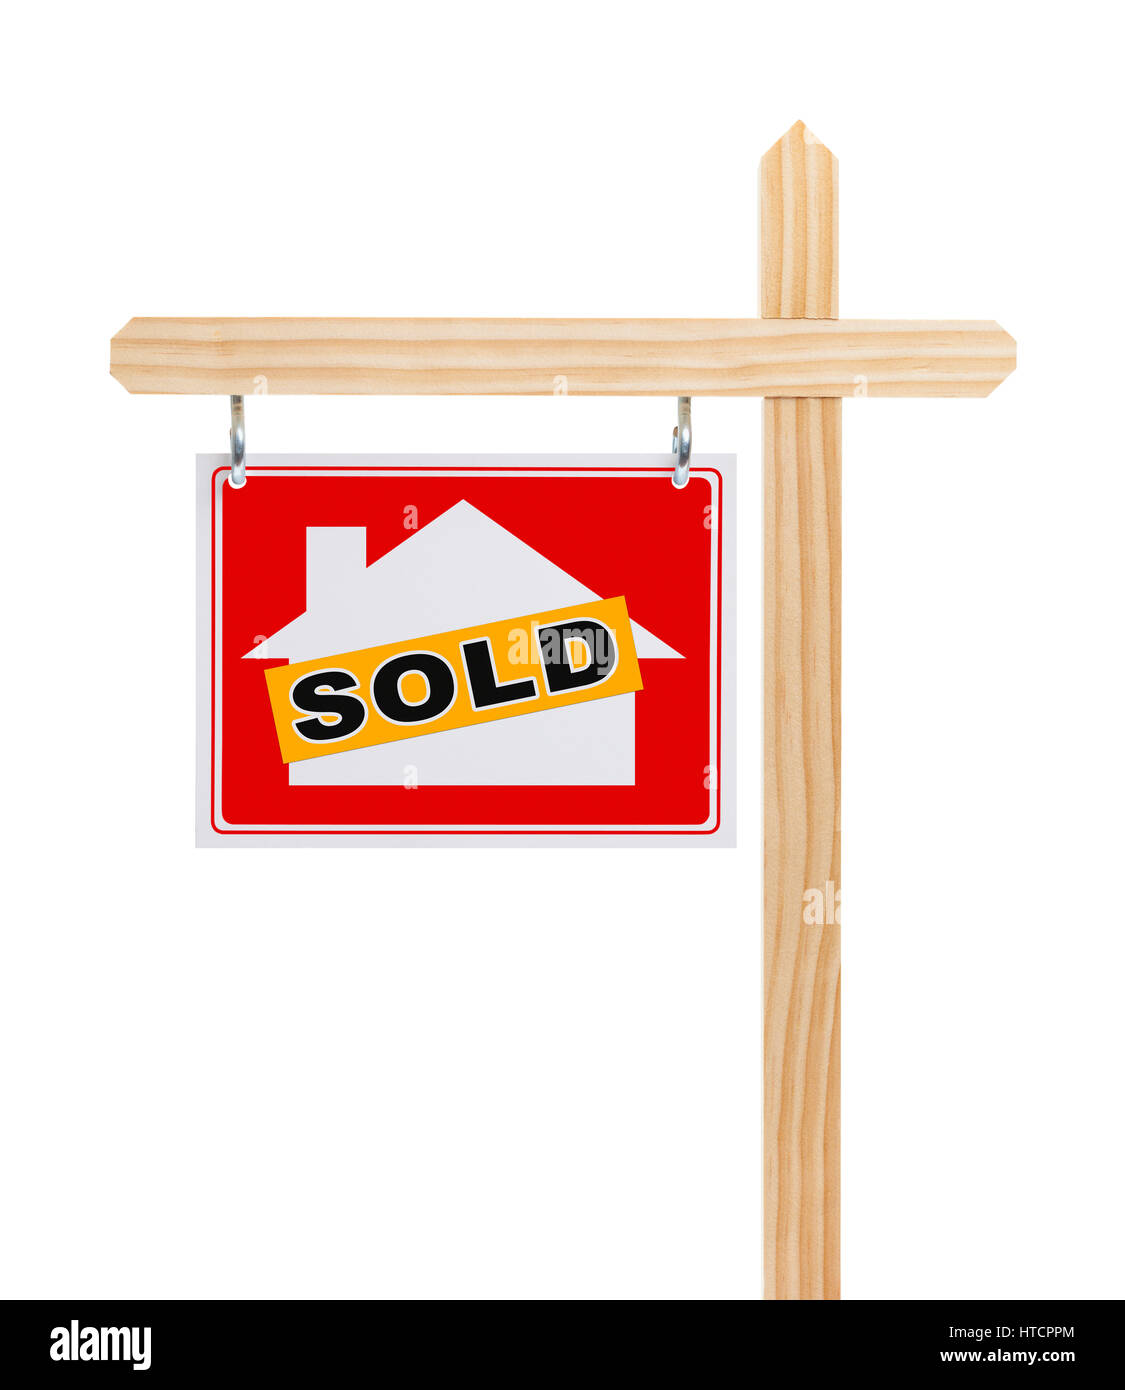 House Sold Real Estate Sign Isolated on White Background. Stock Photo